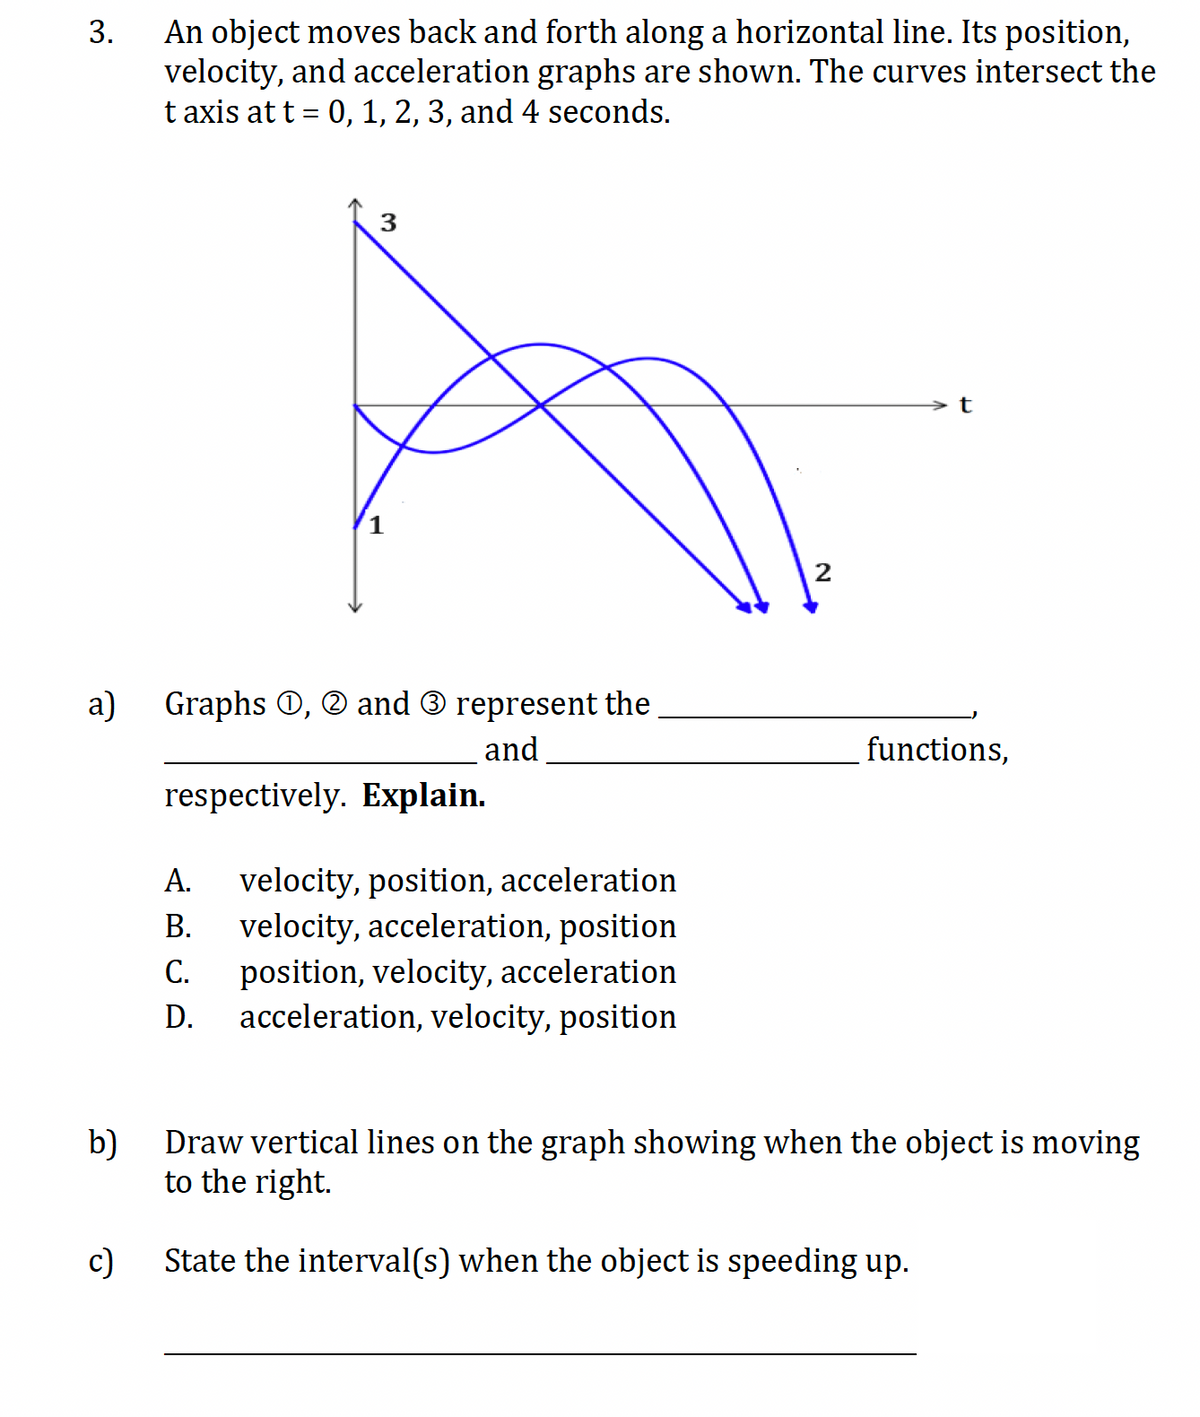 3.
An object moves back and forth along a horizontal line. Its position,
velocity, and acceleration graphs are shown. The curves intersect the
taxis at t = 0, 1, 2, 3, and 4 seconds.
3
2
t
a) Graphs, and ③ represent the
b)
c)
respectively. Explain.
and
A. velocity, position, acceleration
B. velocity, acceleration, position
C. position, velocity, acceleration
D.
ABCD
acceleration, velocity, position
functions,
Draw vertical lines on the graph showing when the object is moving
to the right.
State the interval(s) when the object is speeding up.